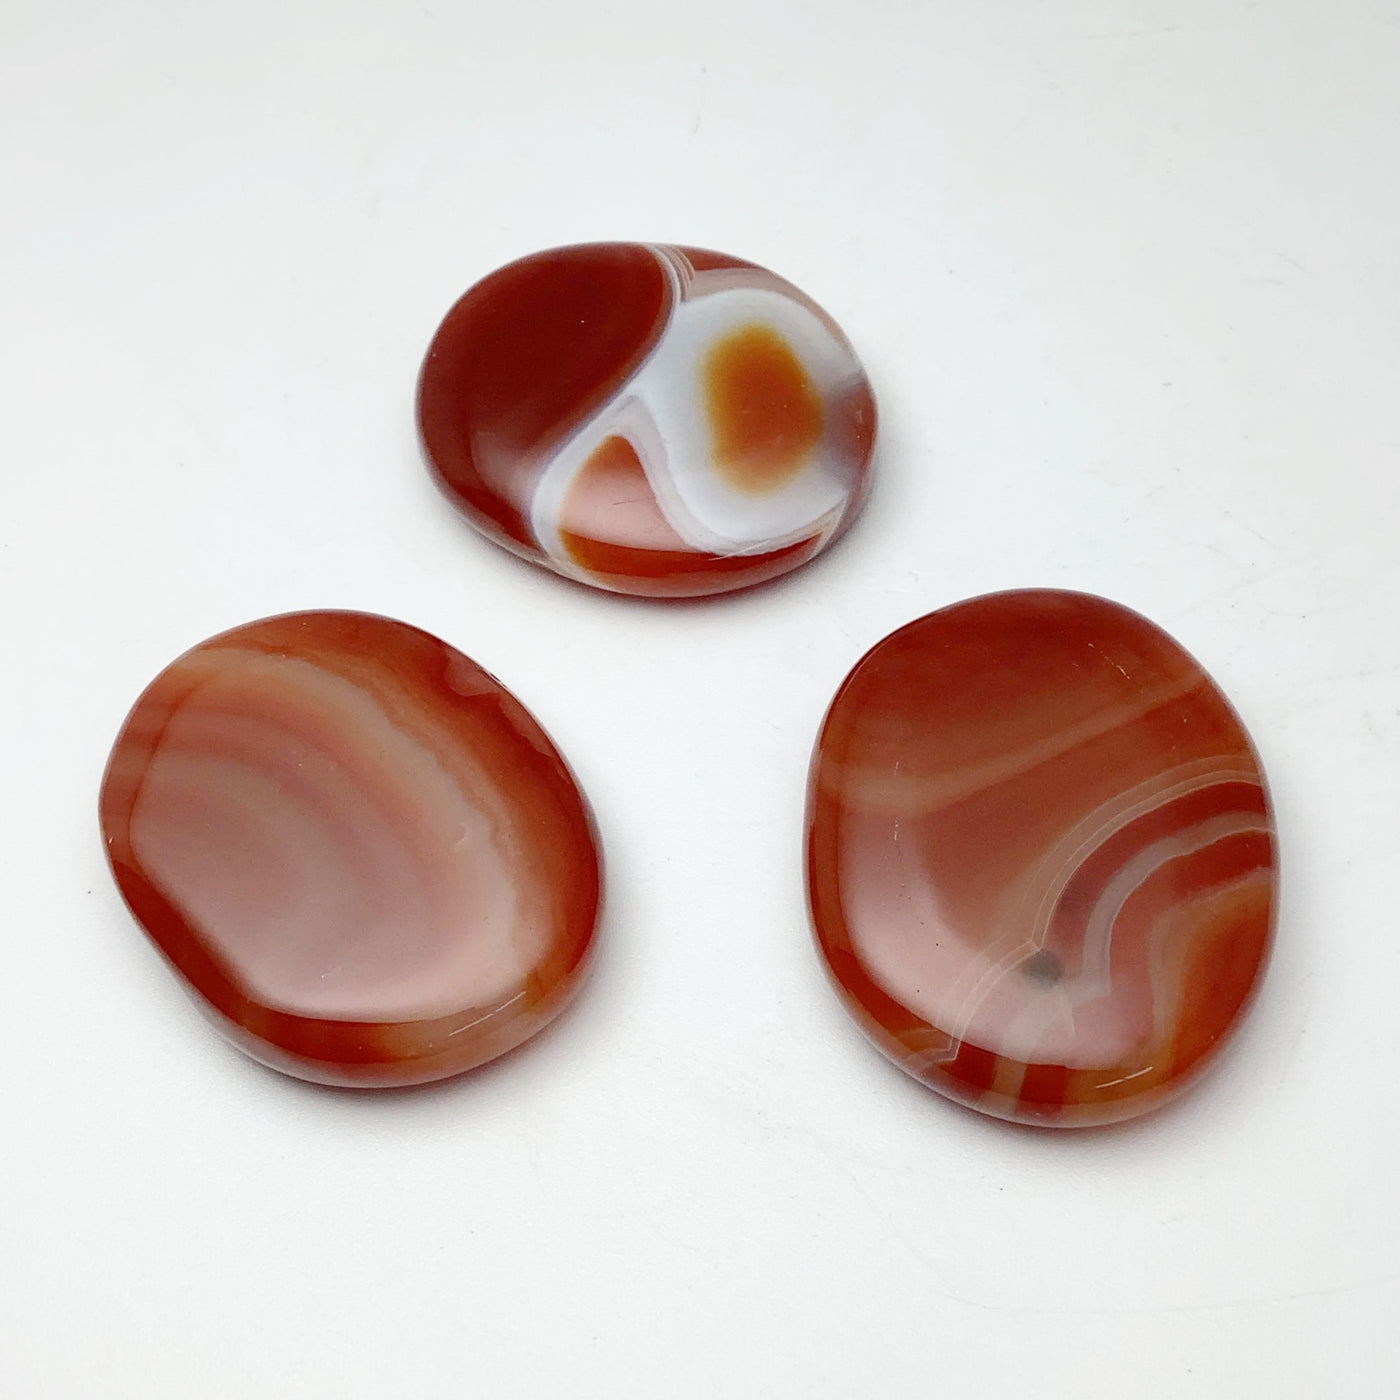 Carnelian Agate Touch Stone at $29 Each